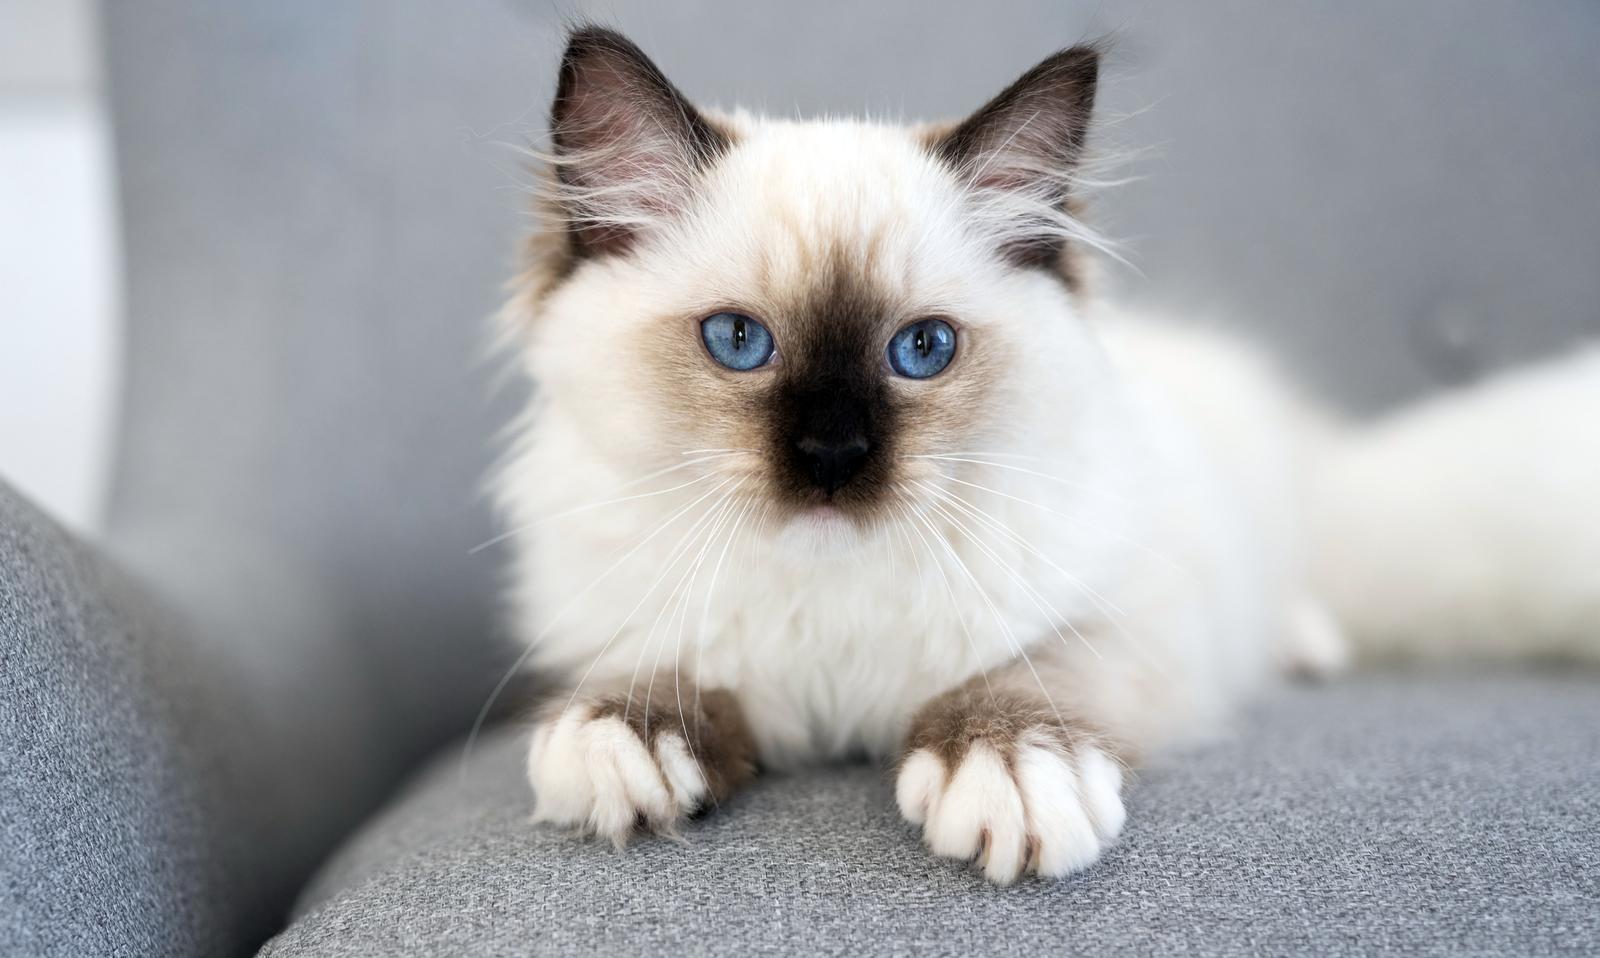 A cat with blue eyes.